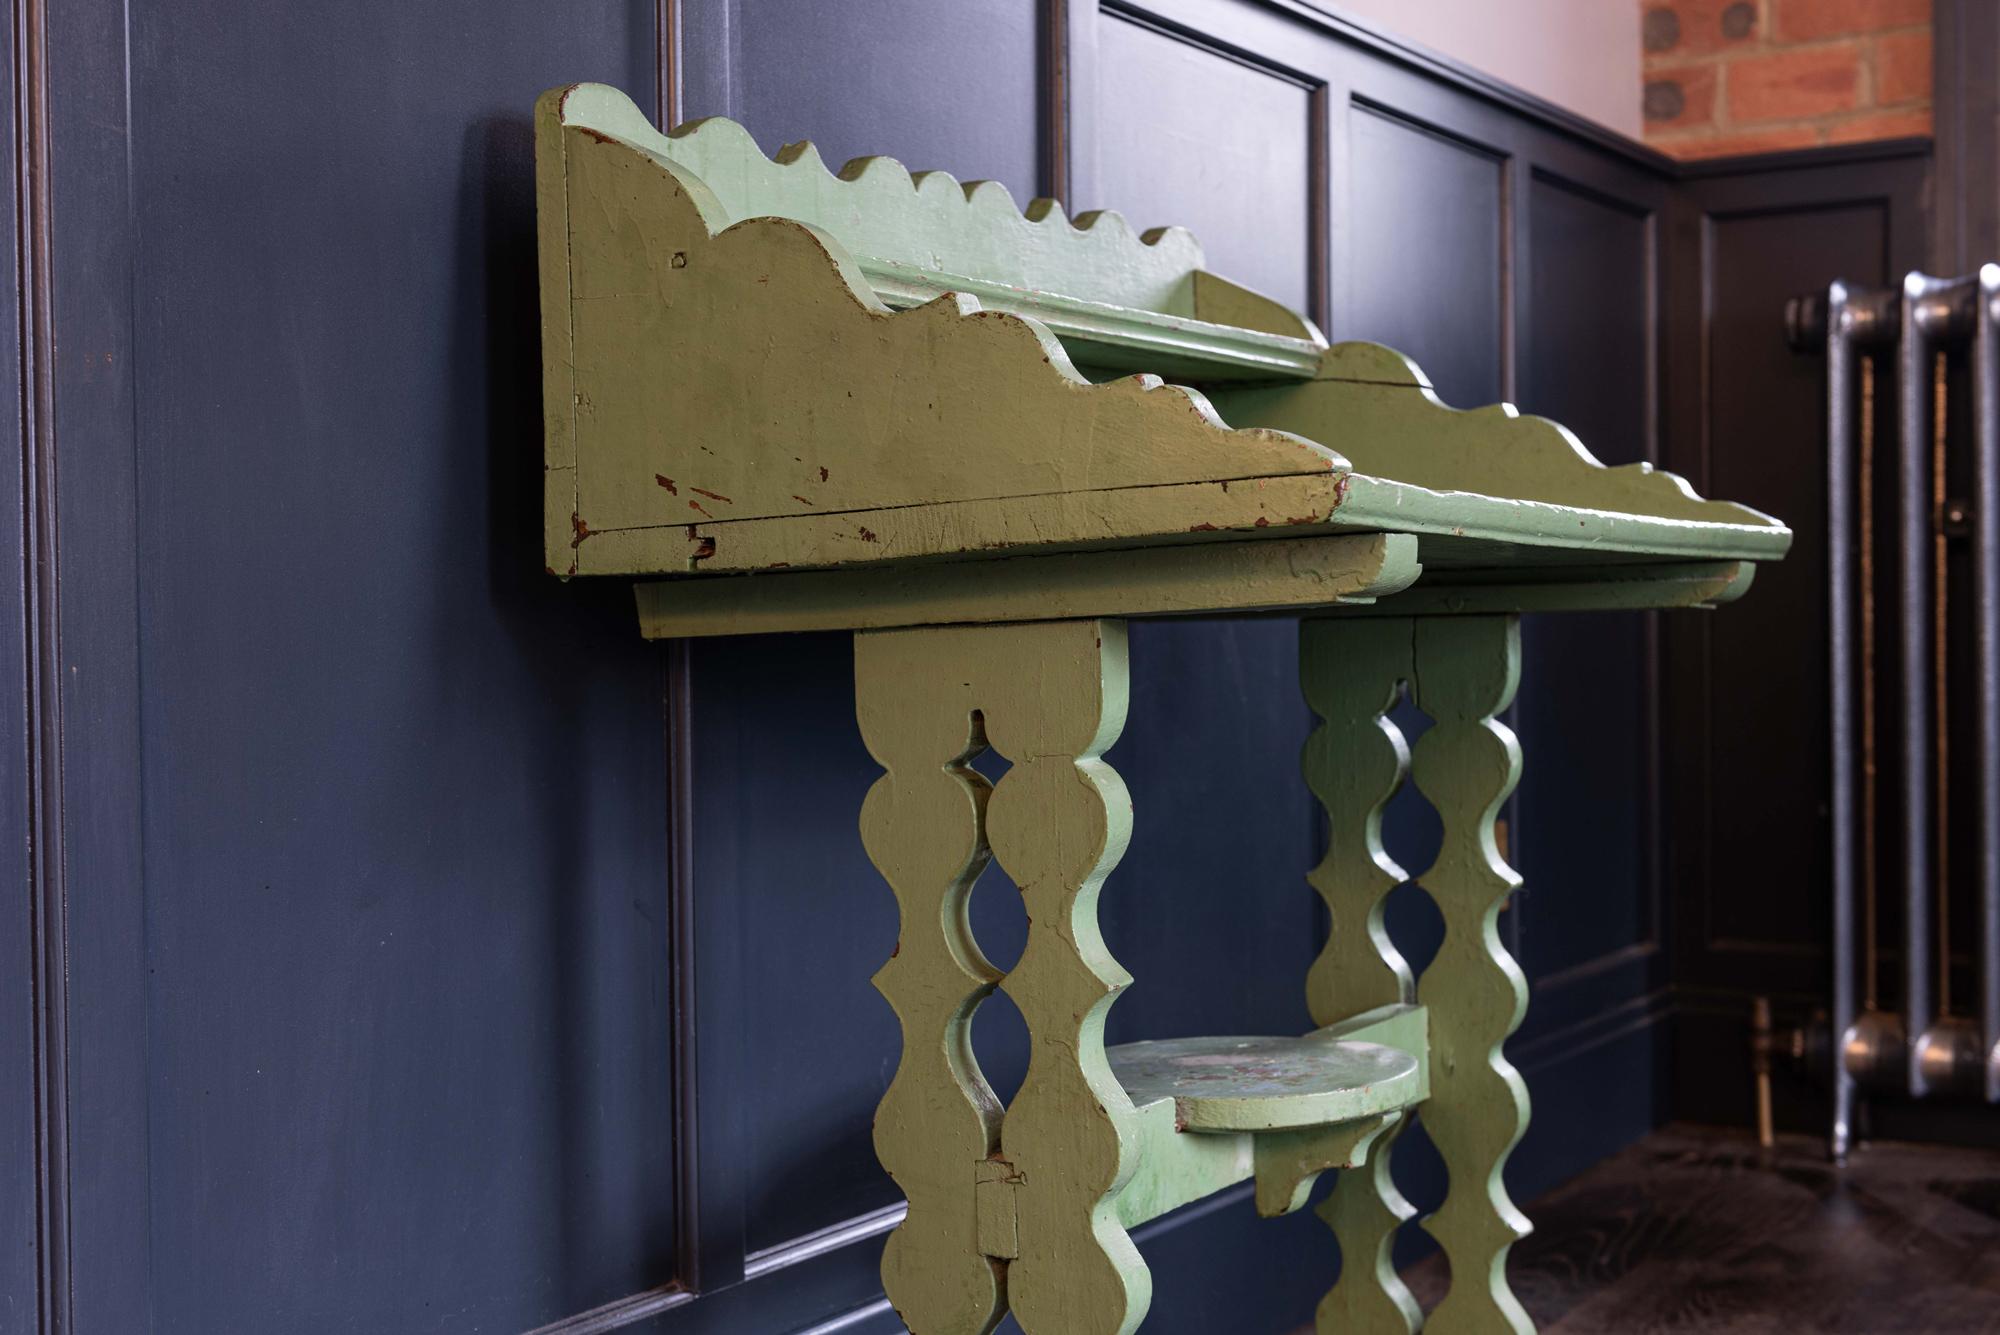 19th century French green painted oak provincial washstand,
circa 1850.

Decorative carved oak washstand overpainted.

Measures: W 70.5 x D 45 x H 89 cm.
Height to the Table Top is 66cm